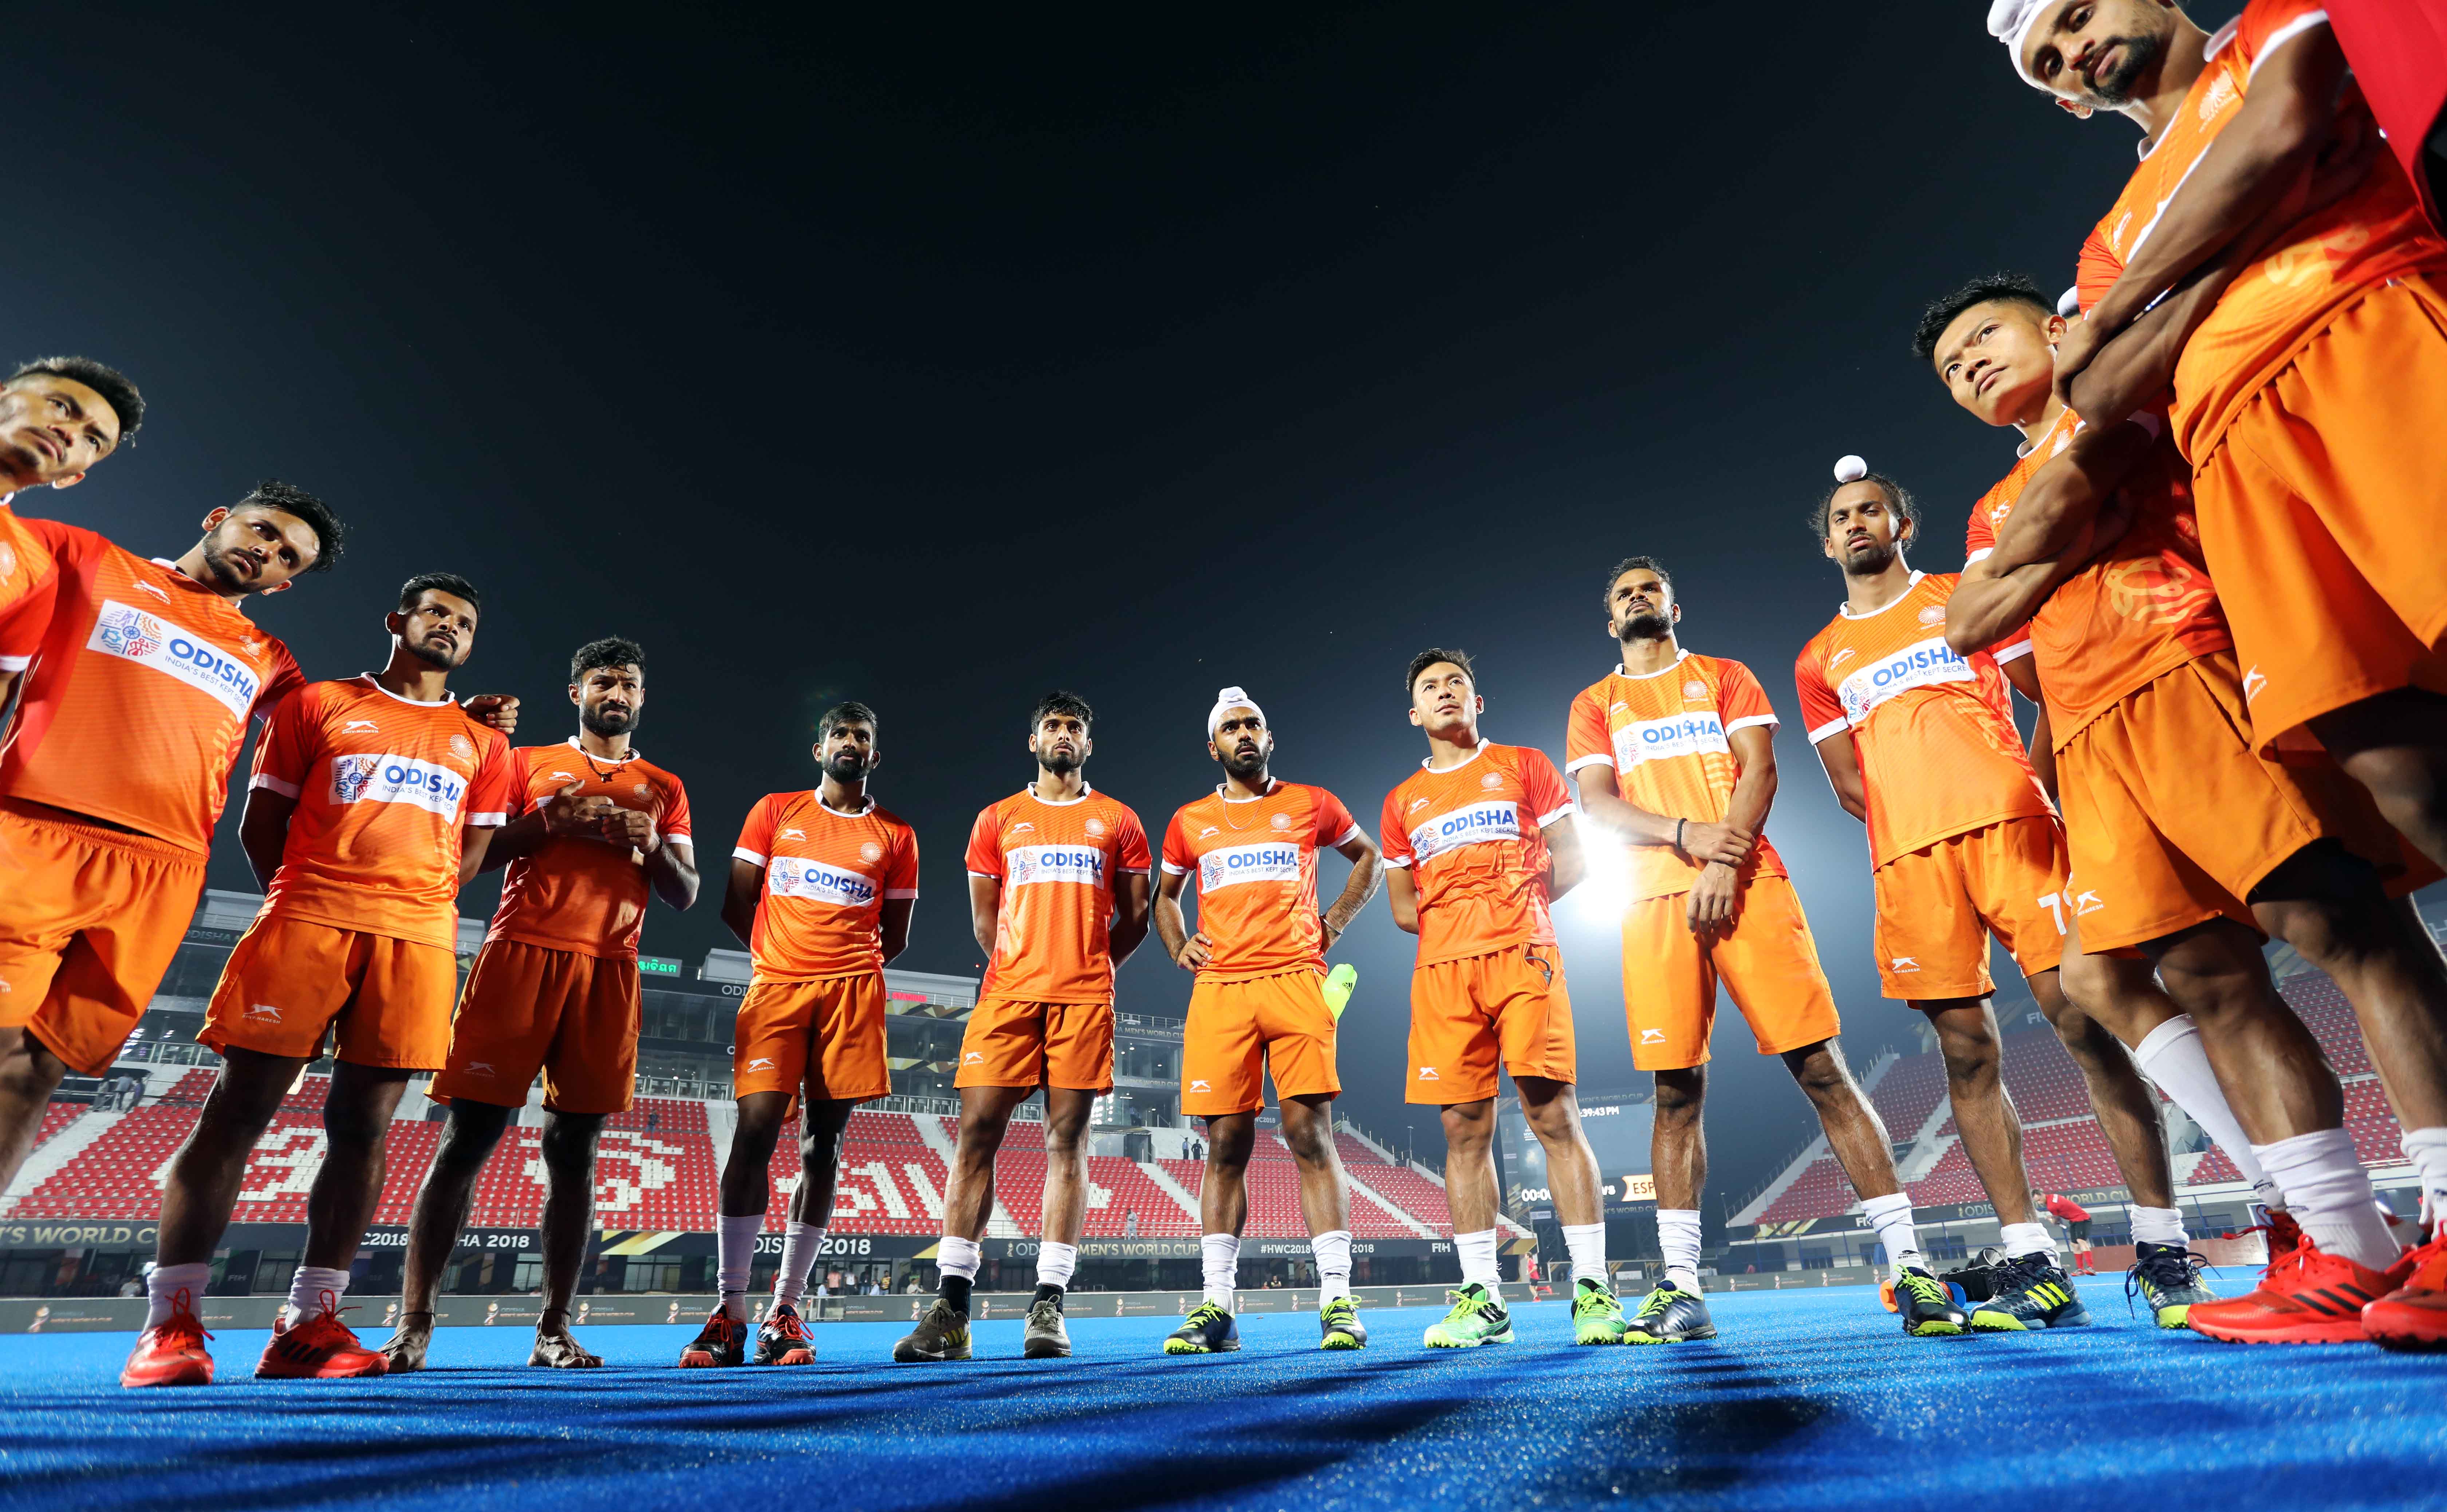 FIH Olympic Qualifiers | Feels good to be back for major tournament, says Rupinder Pal Singh